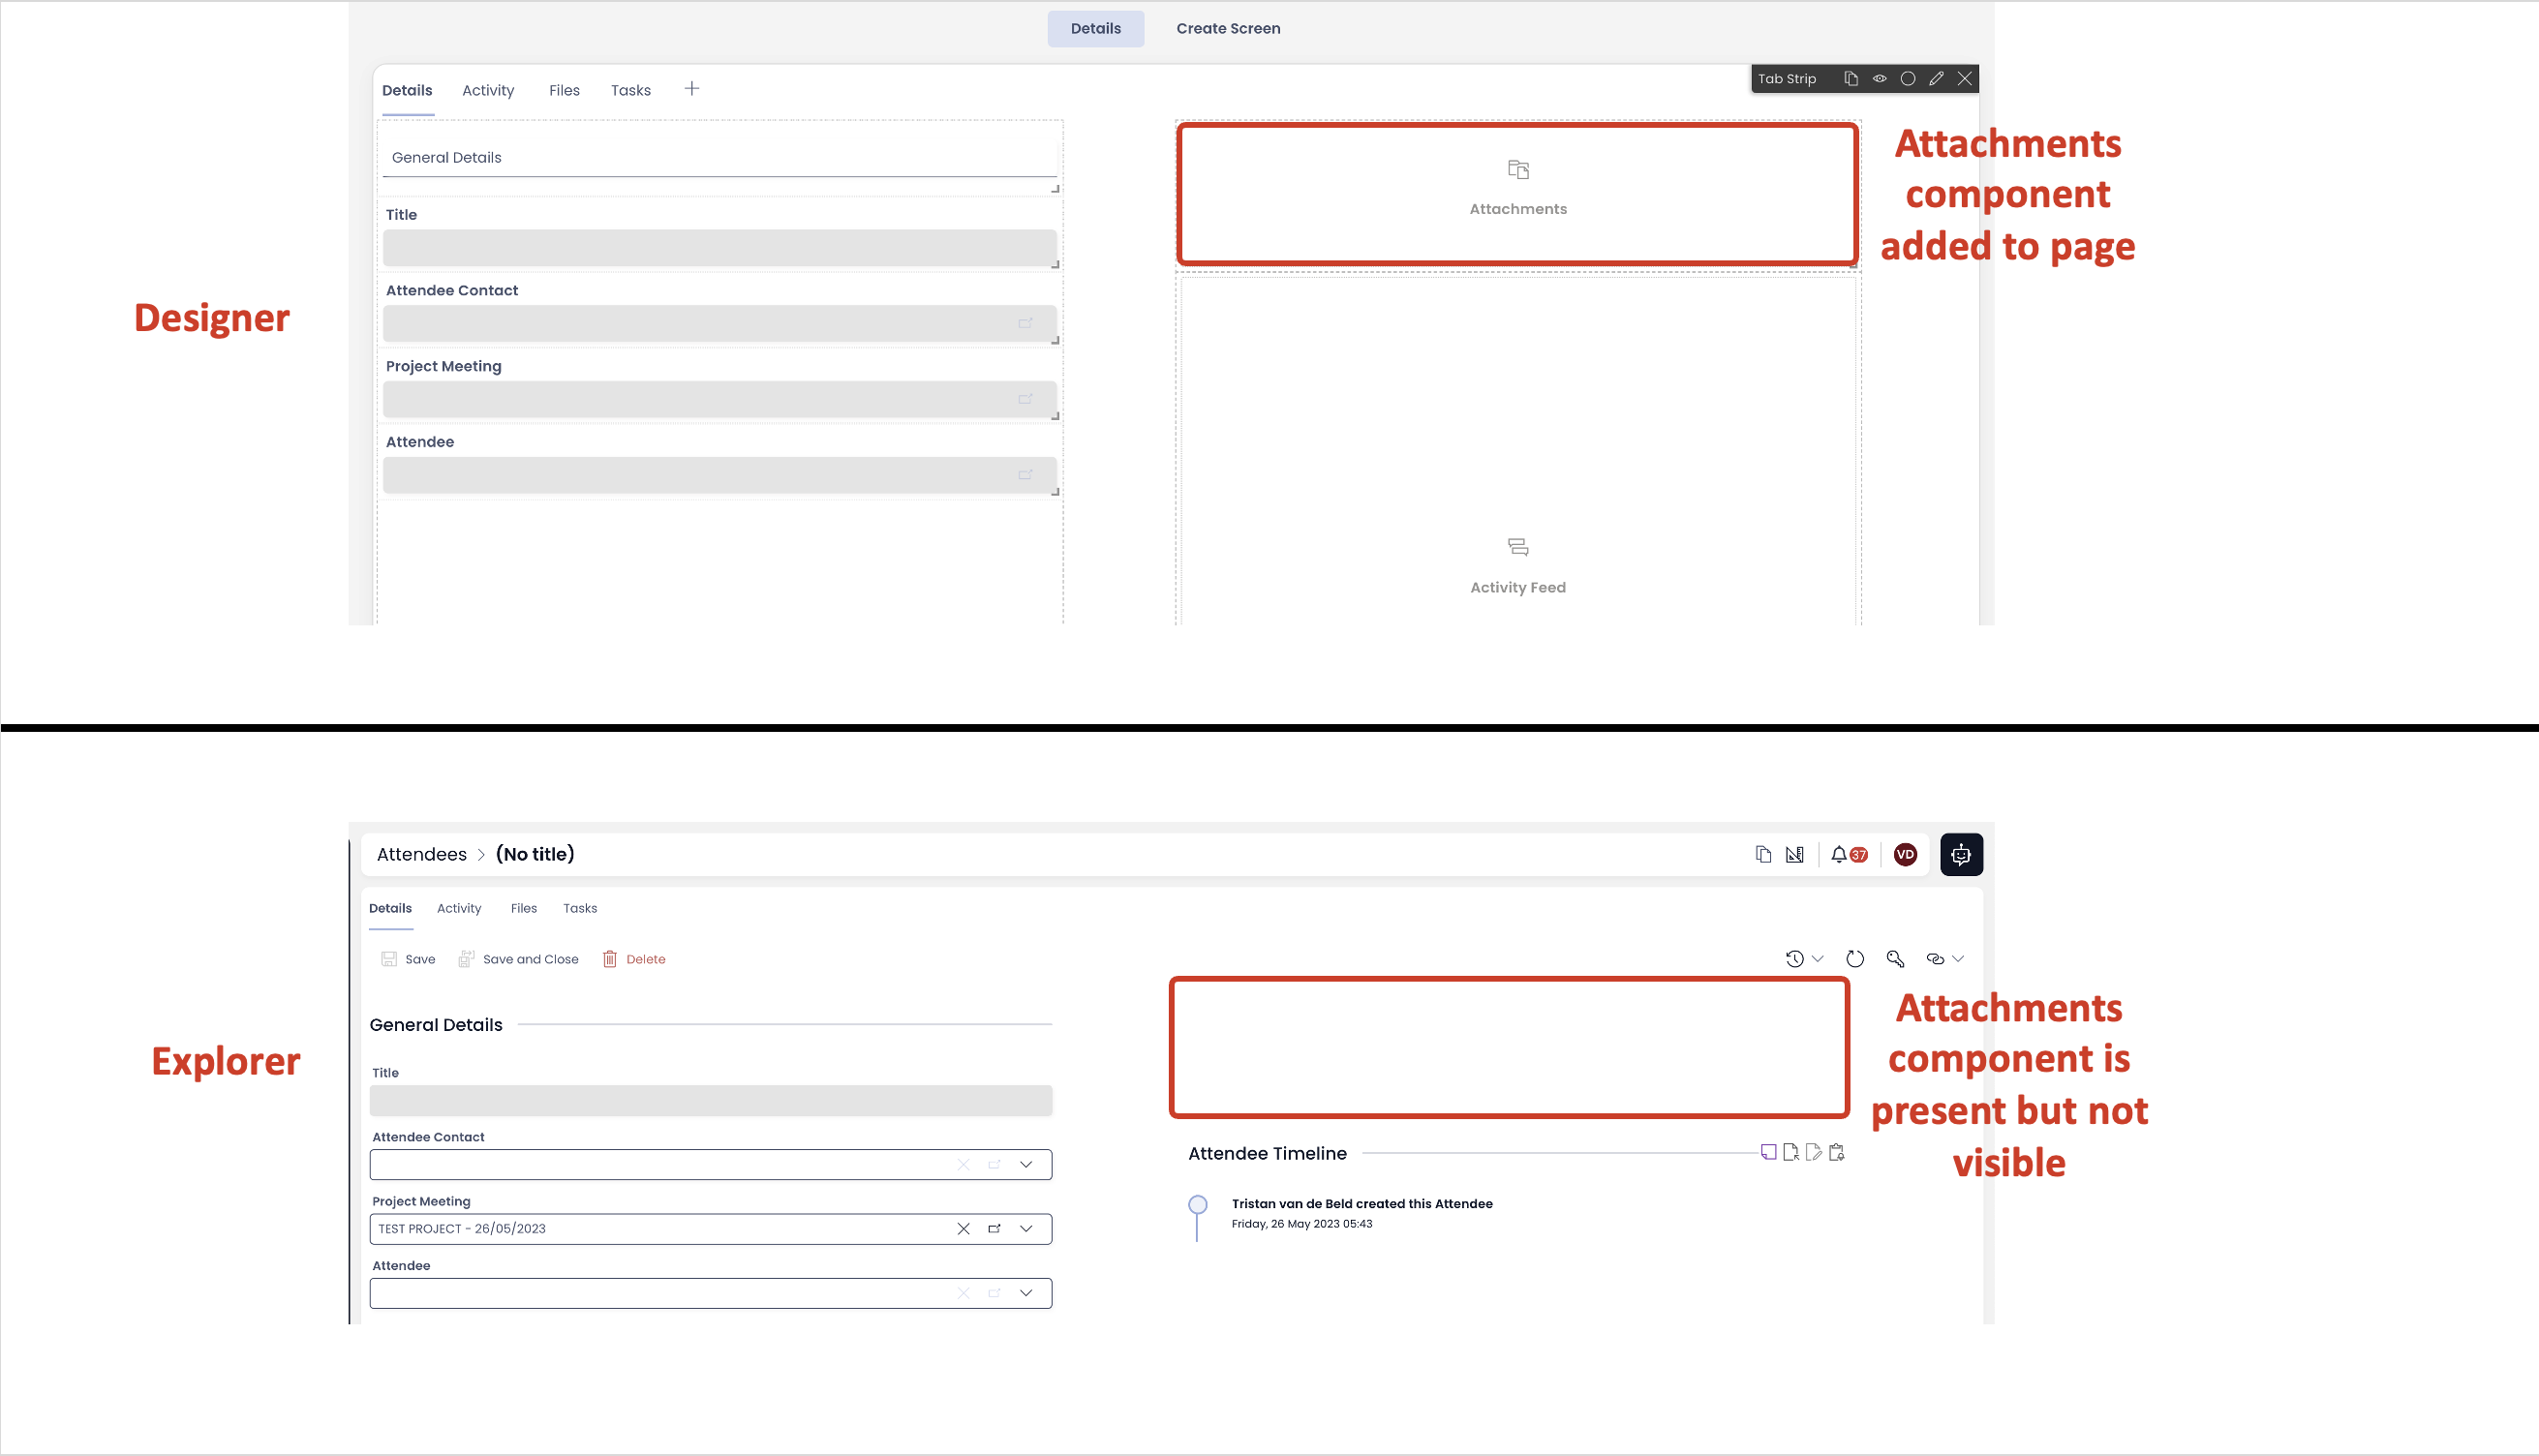 A screenshot of how the attachments component is visible in Designer, but will become invisible in Explorer if no files are attached to the component. The screenshot is a comparison, with Designer on top and Explorer&#39;s view underneath.